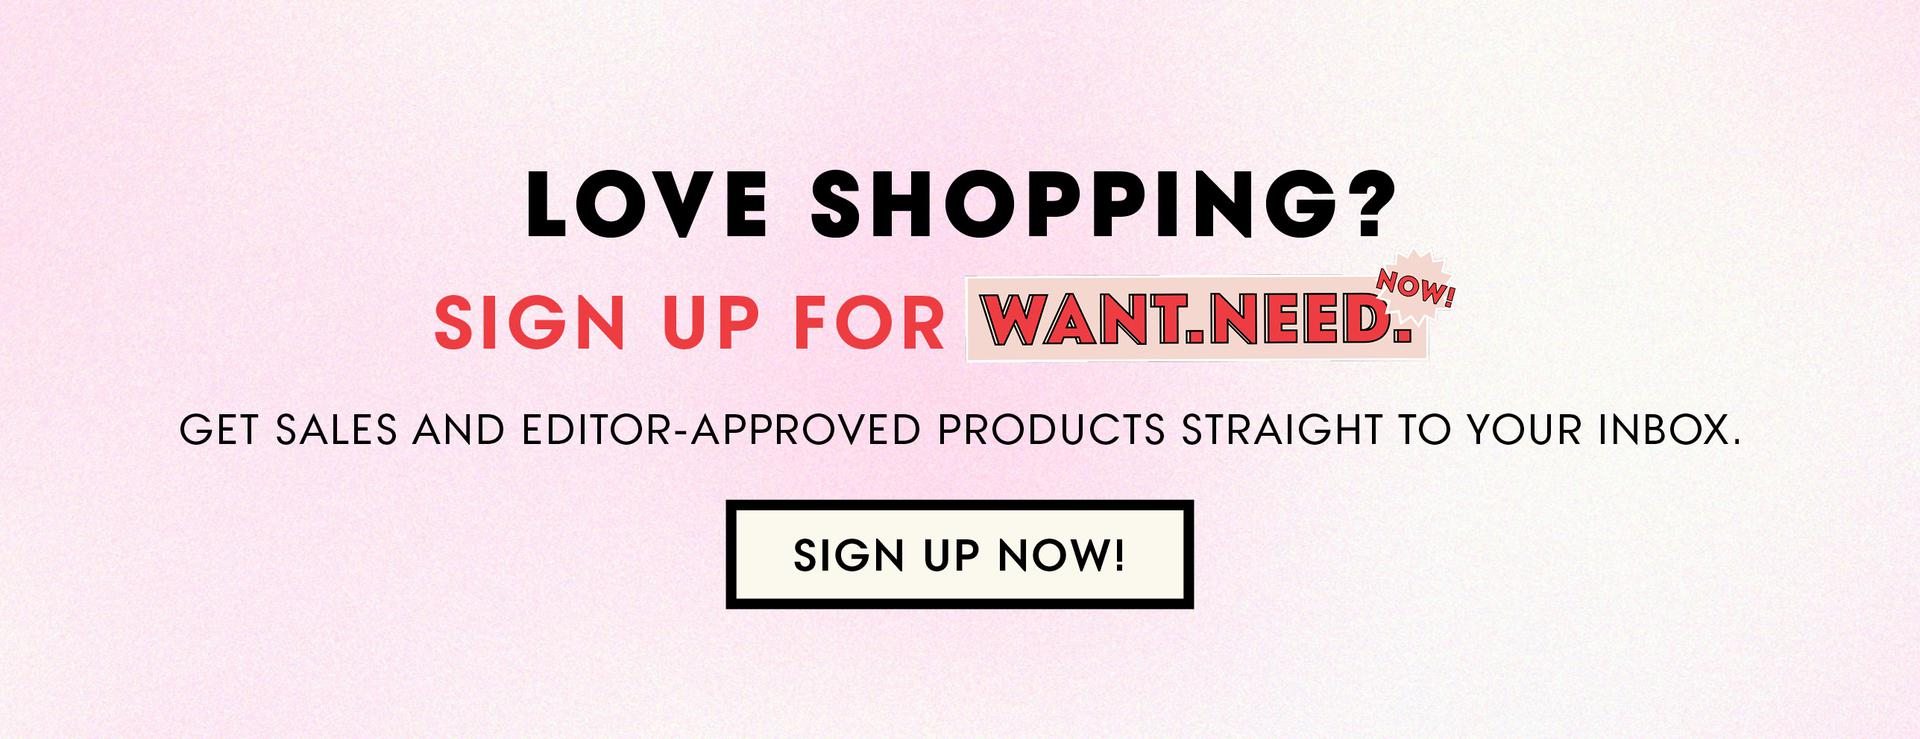 (image) Love Shopping? Sign Up For Want.Need.Now! Get Sales and Editor-Approved Products Straight To Your Inbox. Sign Up Now!